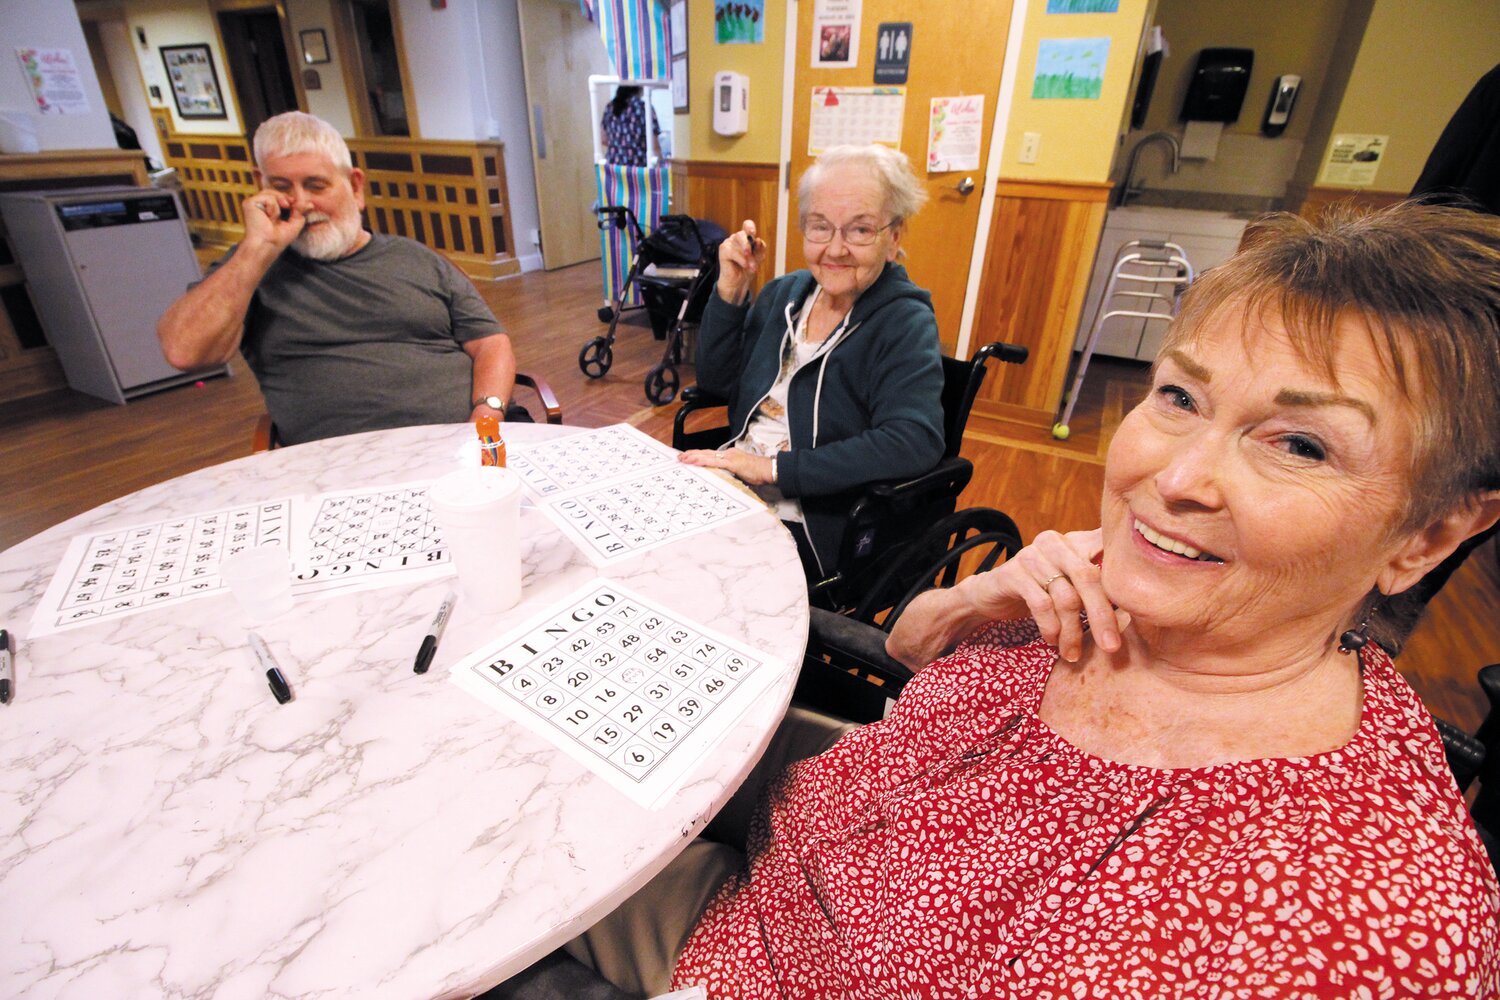 WINNING IS ALWAYS GOOD: Allan Gourse, Diana Ware and Bonnie Norberg wore smiles following an afternoon of bingo at Warwick Health Care Center even though none were winners. The center has daily activities to engage residents. (Warwick Beacon photos)